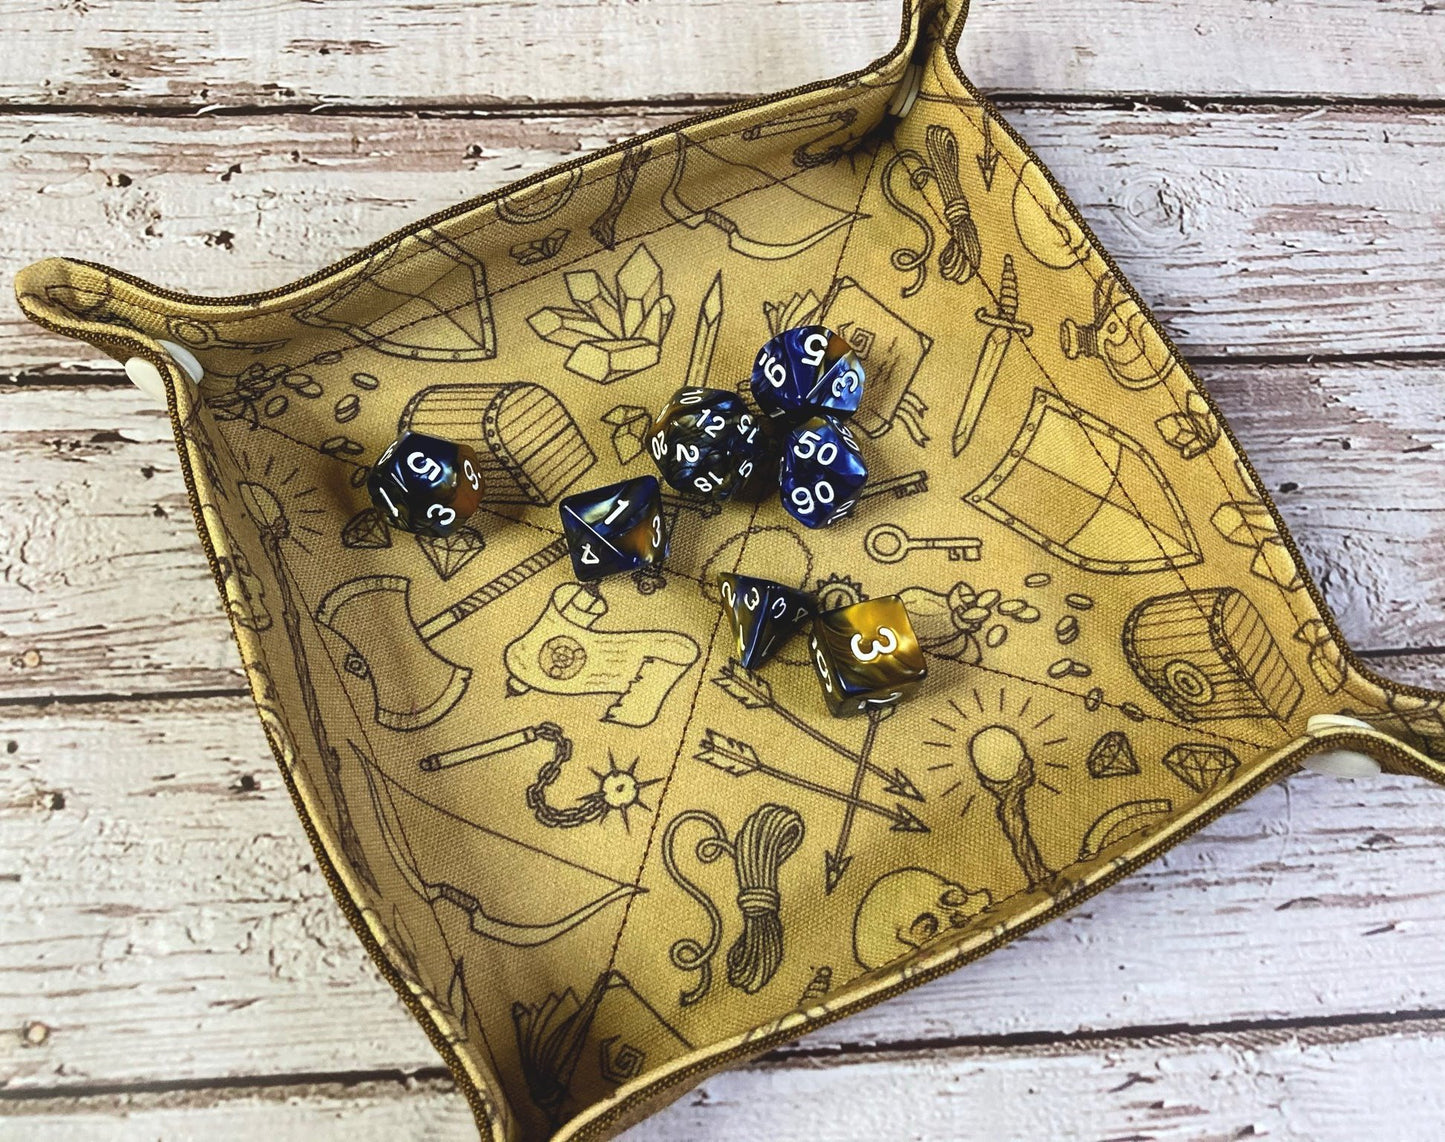 Dice and Trinket Tray